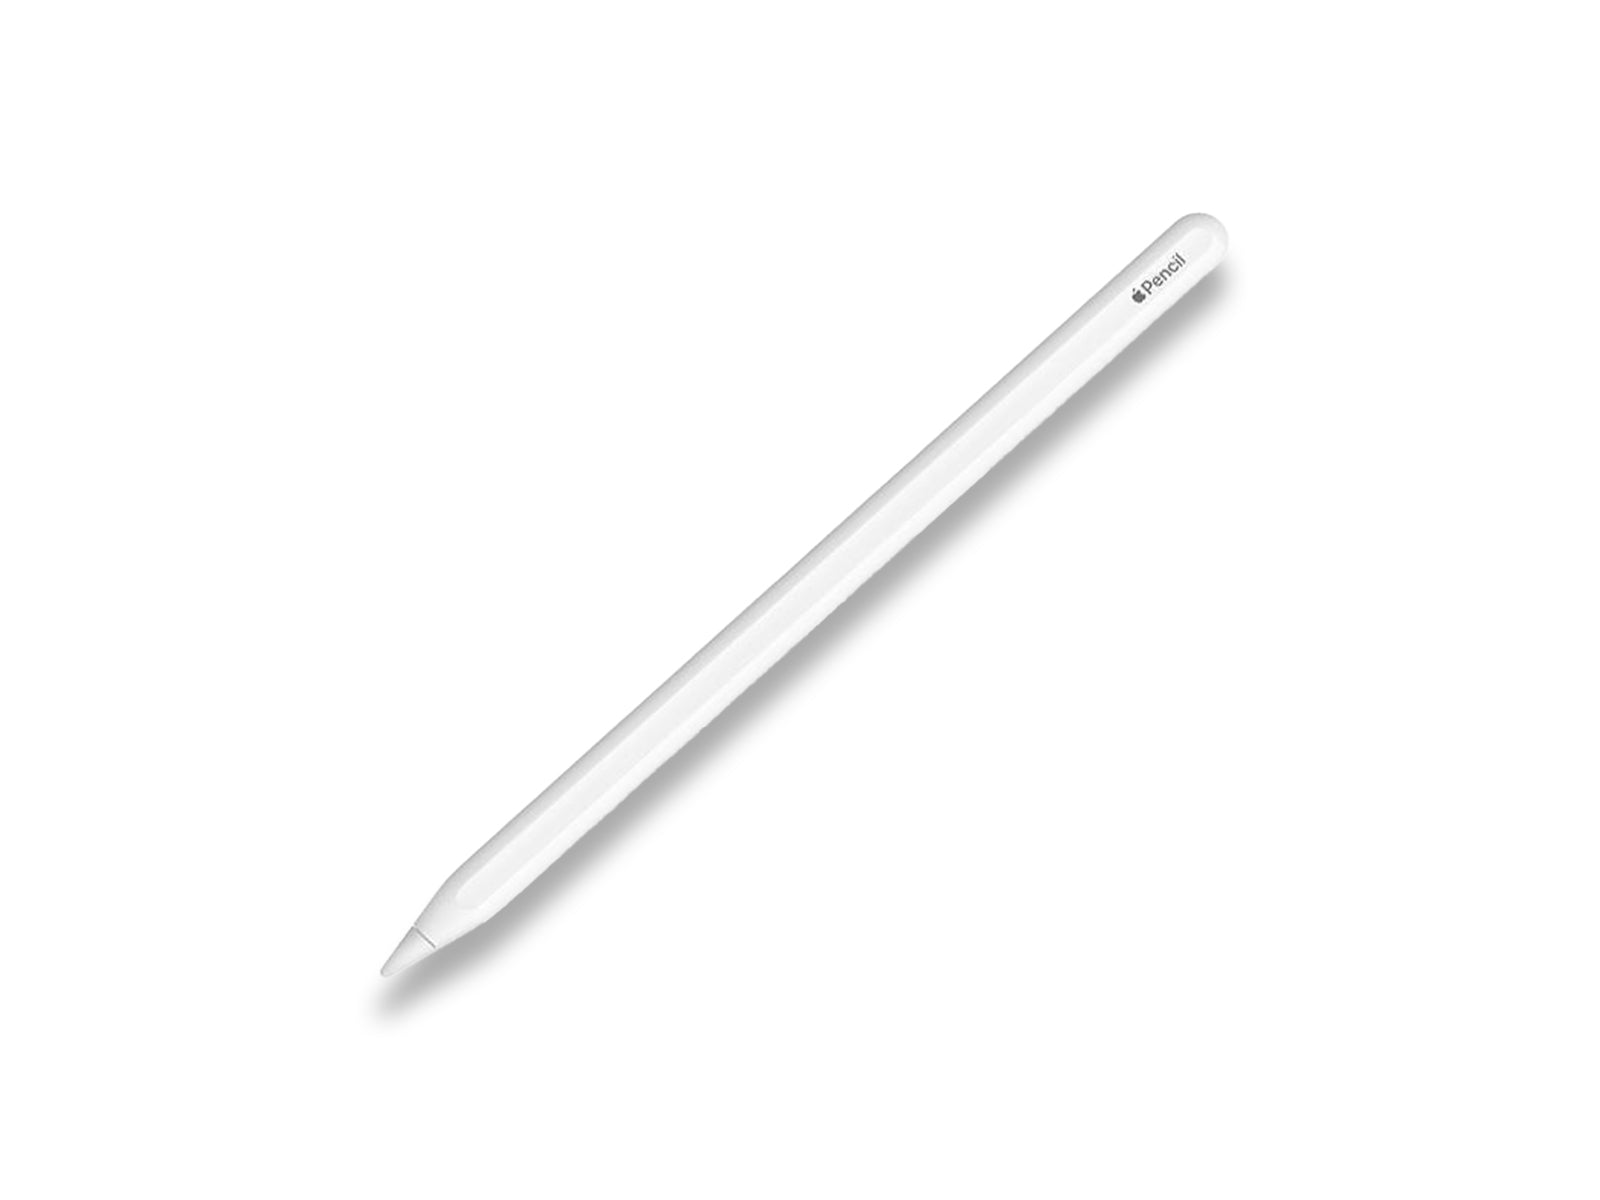 Image shows 2nd gen apple pencil front view angled on white background